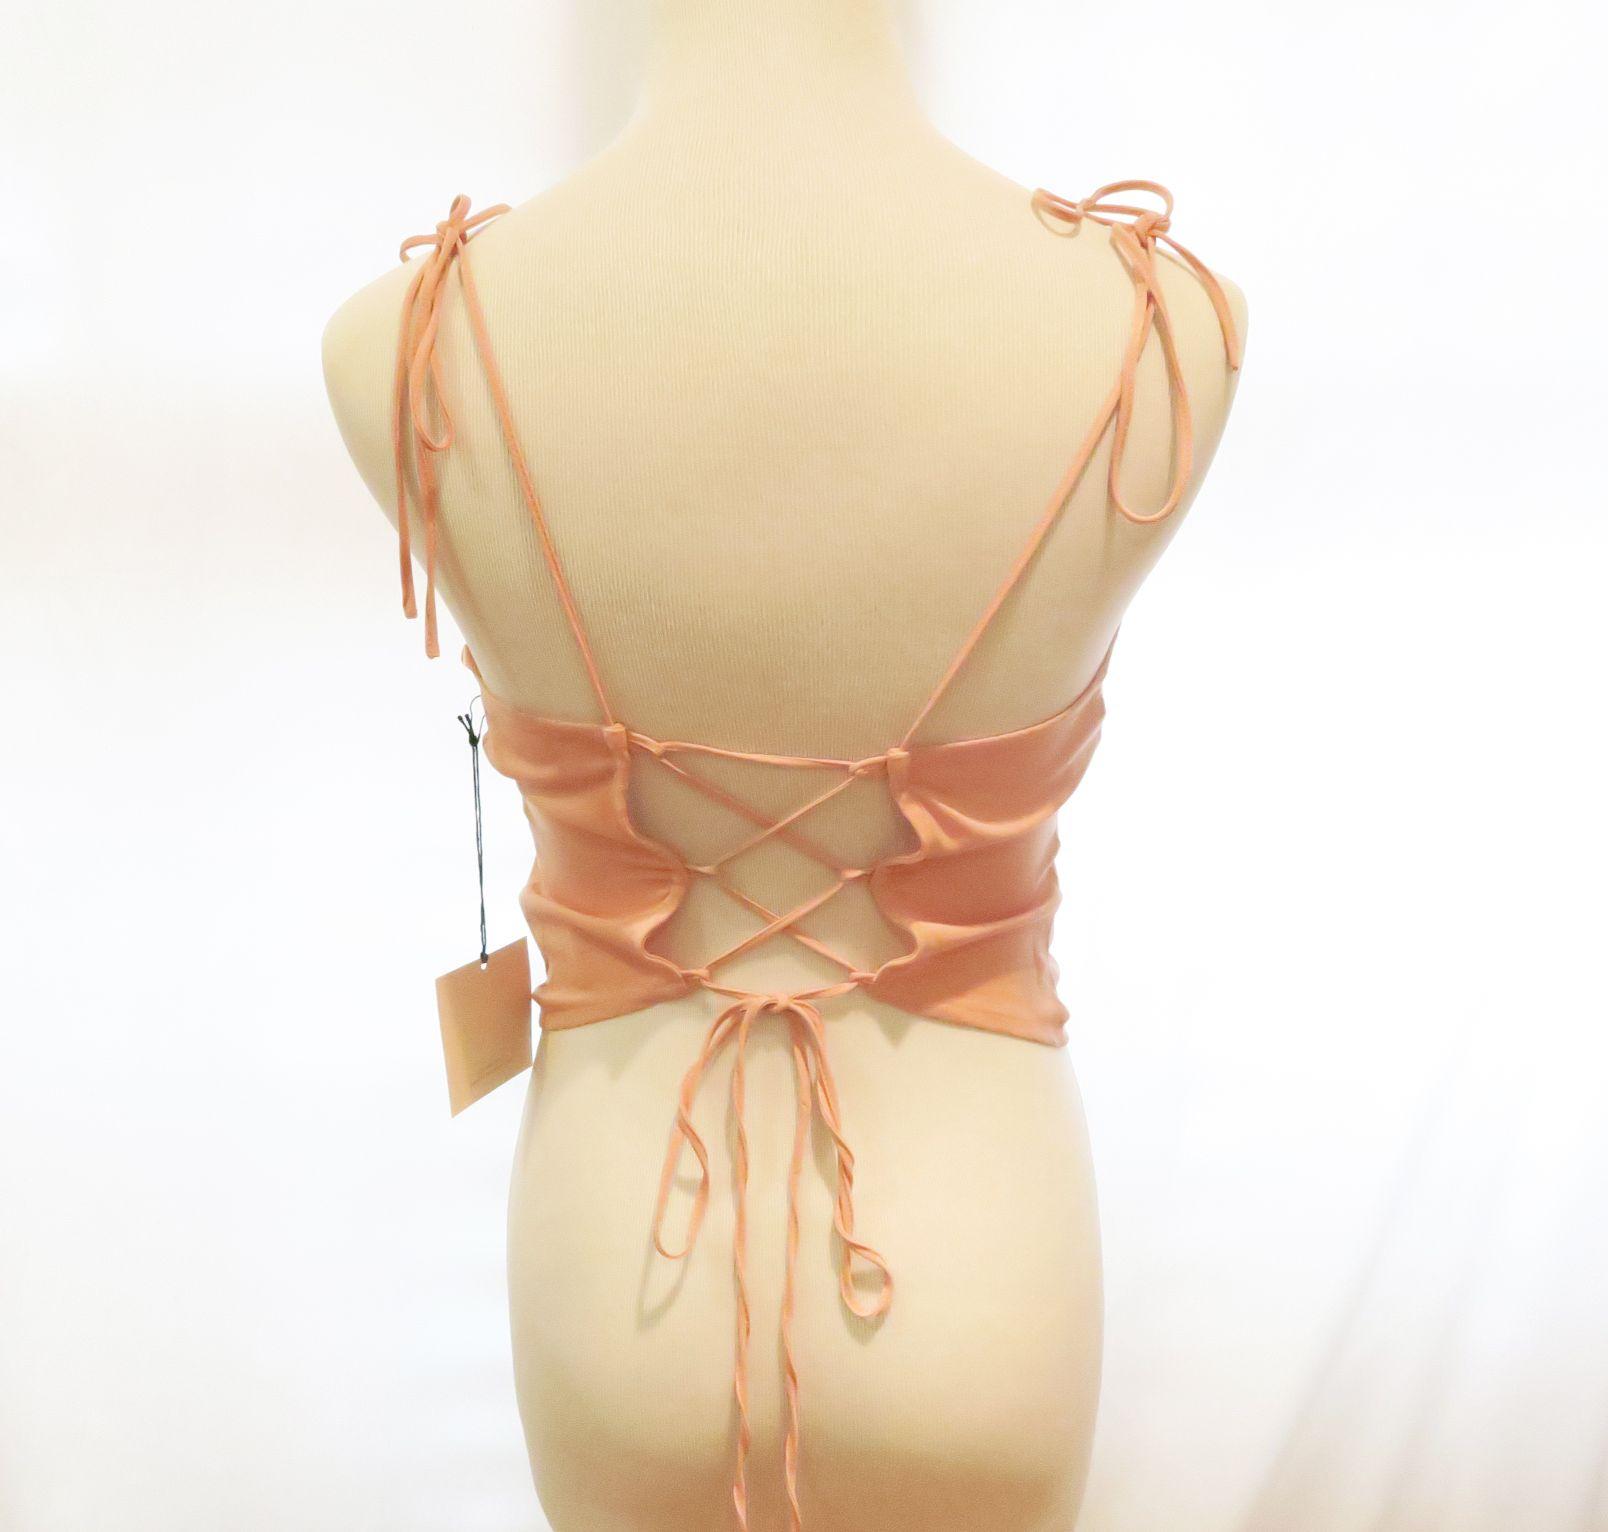 Super Down Pink Spaghetti Strap Lace-up Back Top, size XS, new with tags